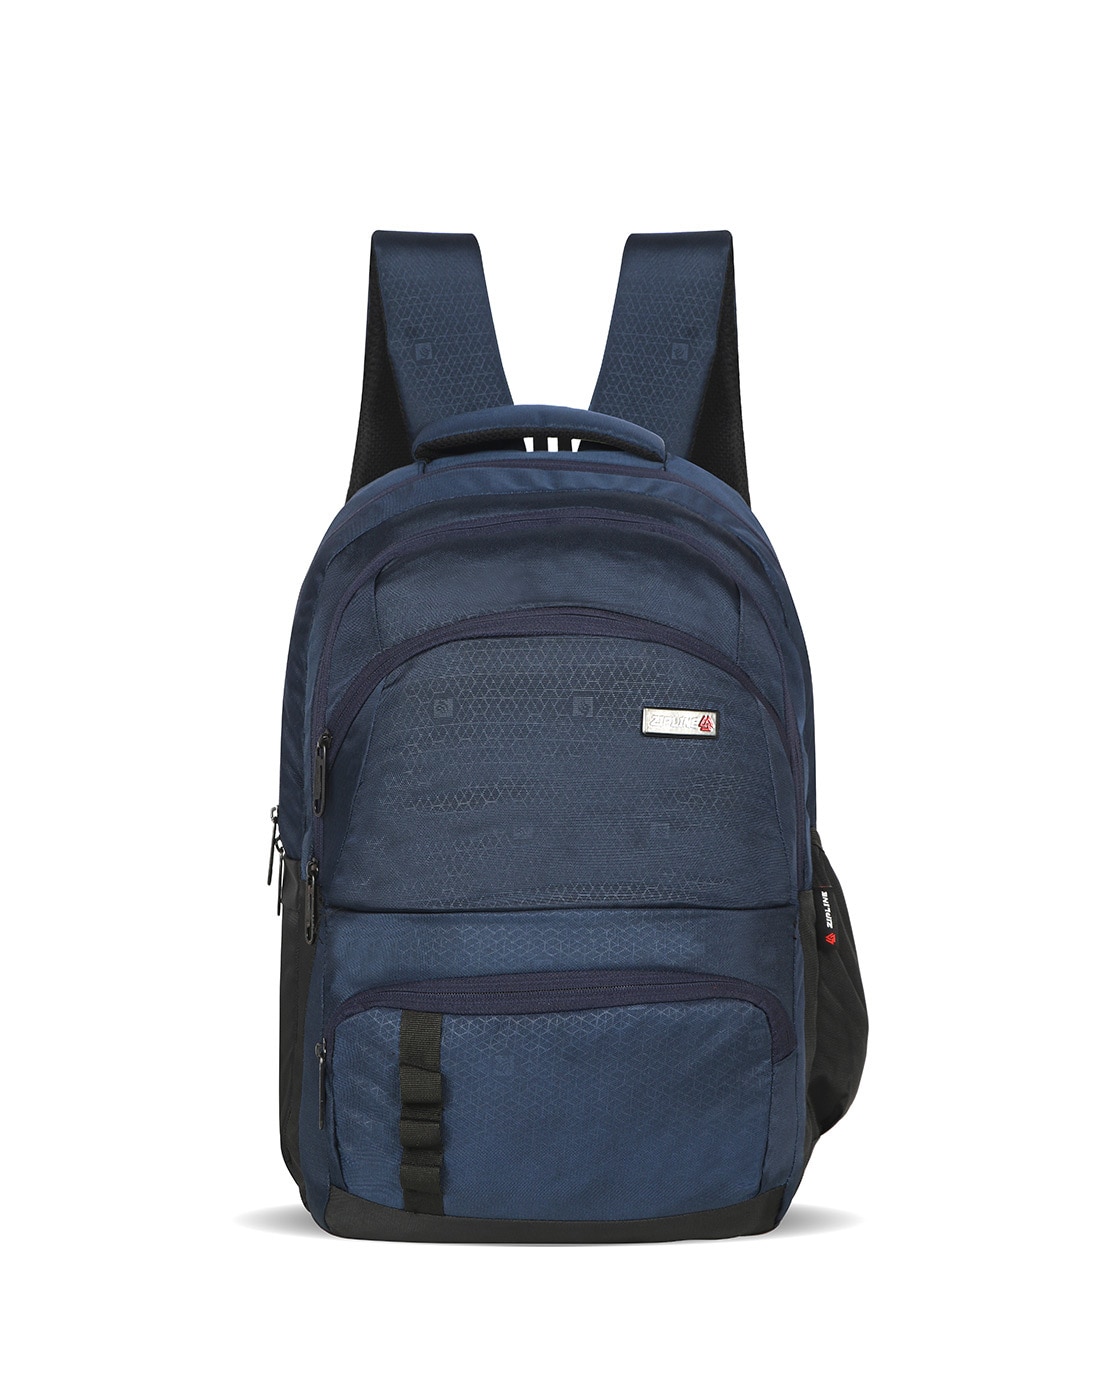 Zipline Casual 36 L School Bag Navy Blue Height 18 Inch Online in India,  Buy at Best Price from Firstcry.com - 13381372